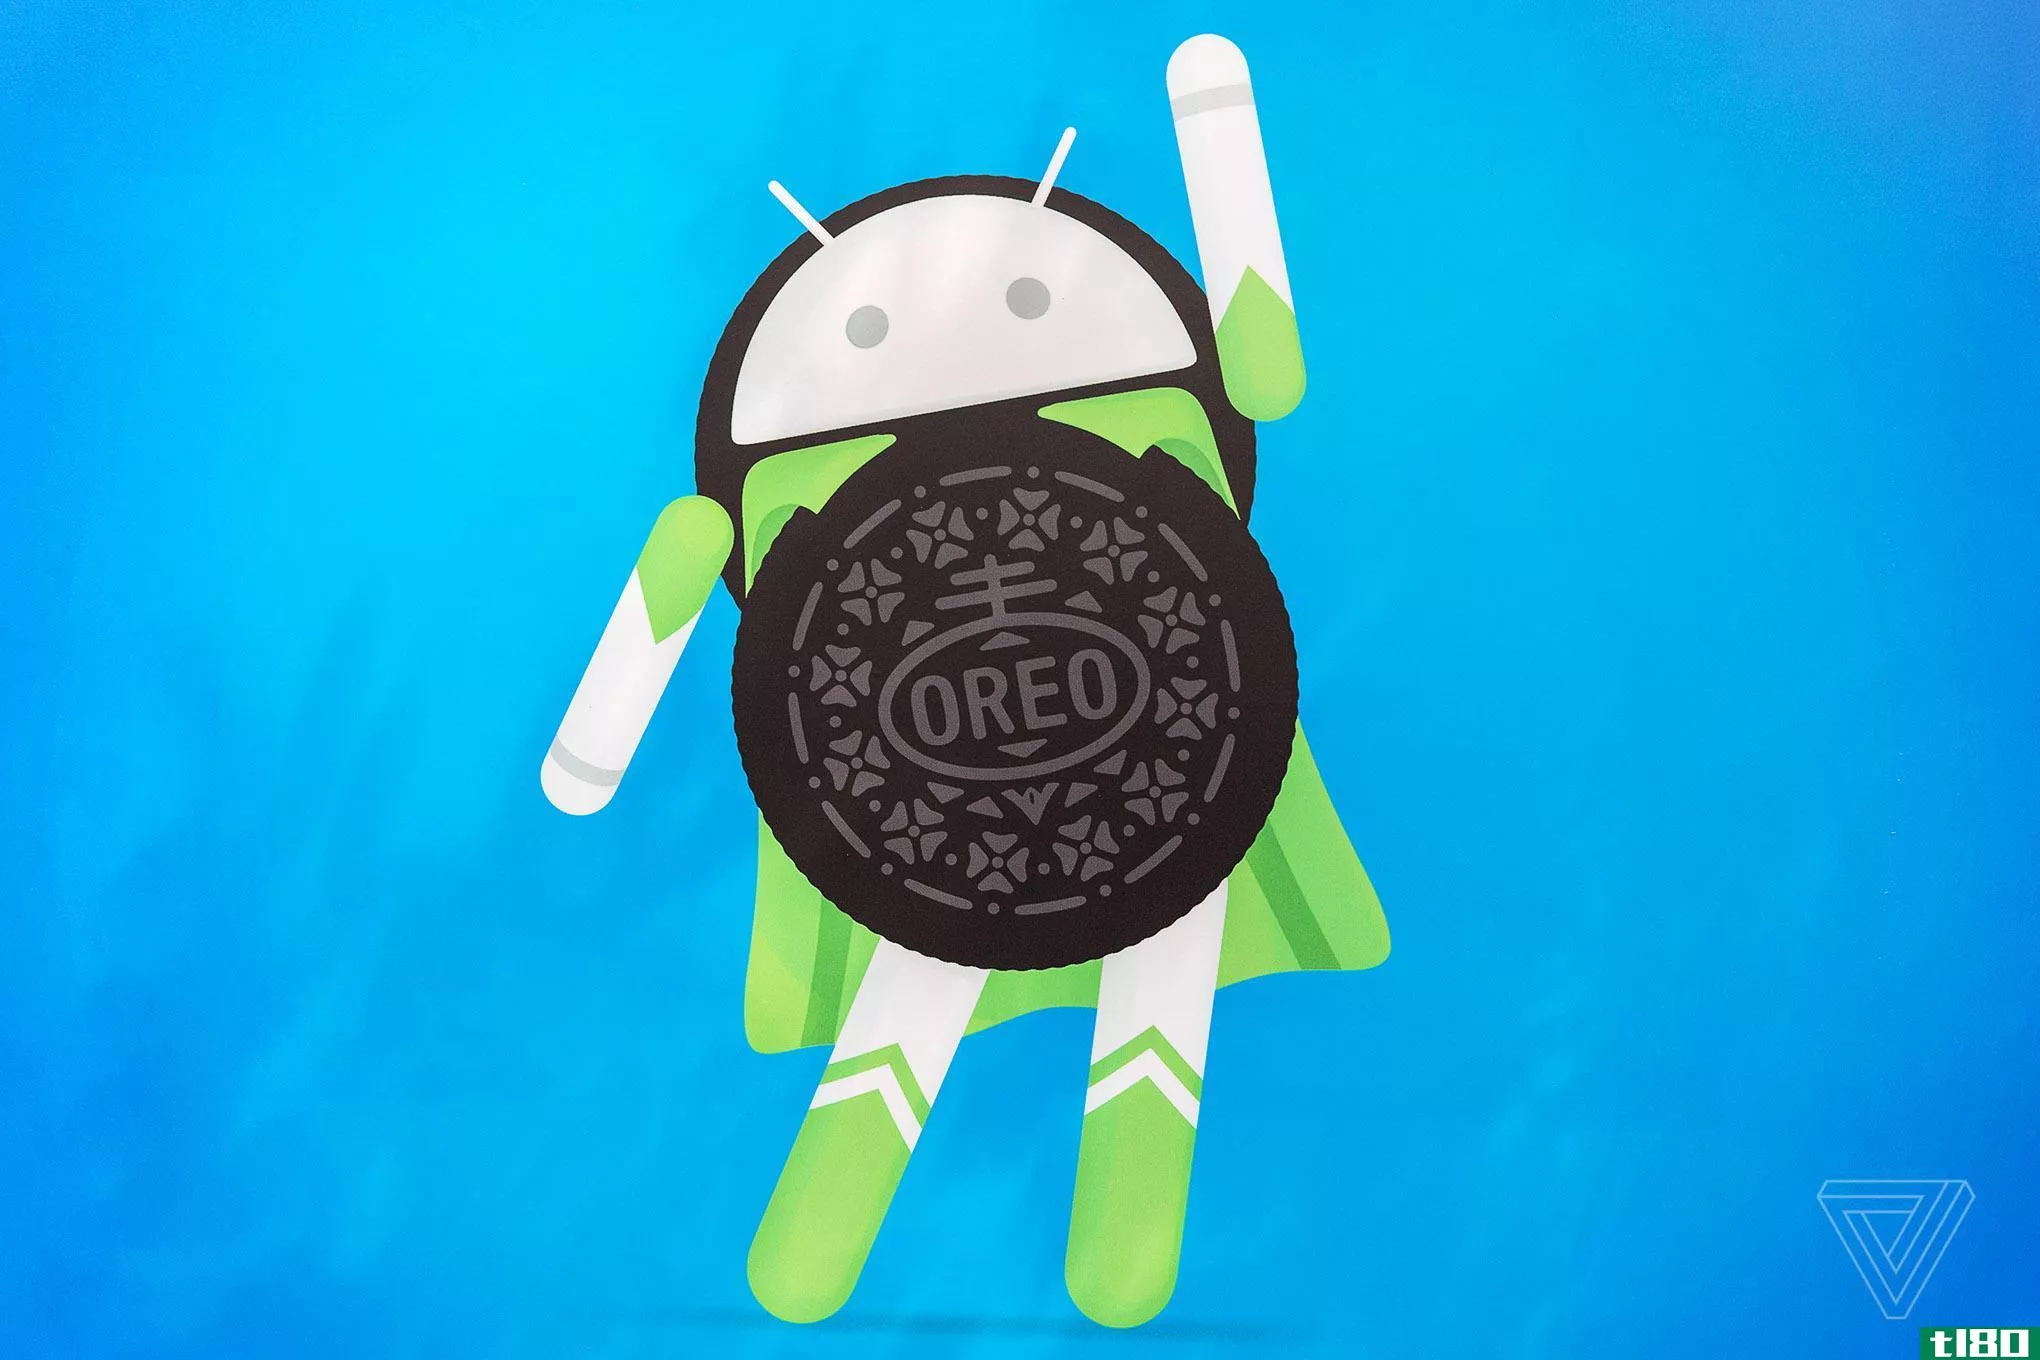 android oreo 8.1开发者预览版现已推出